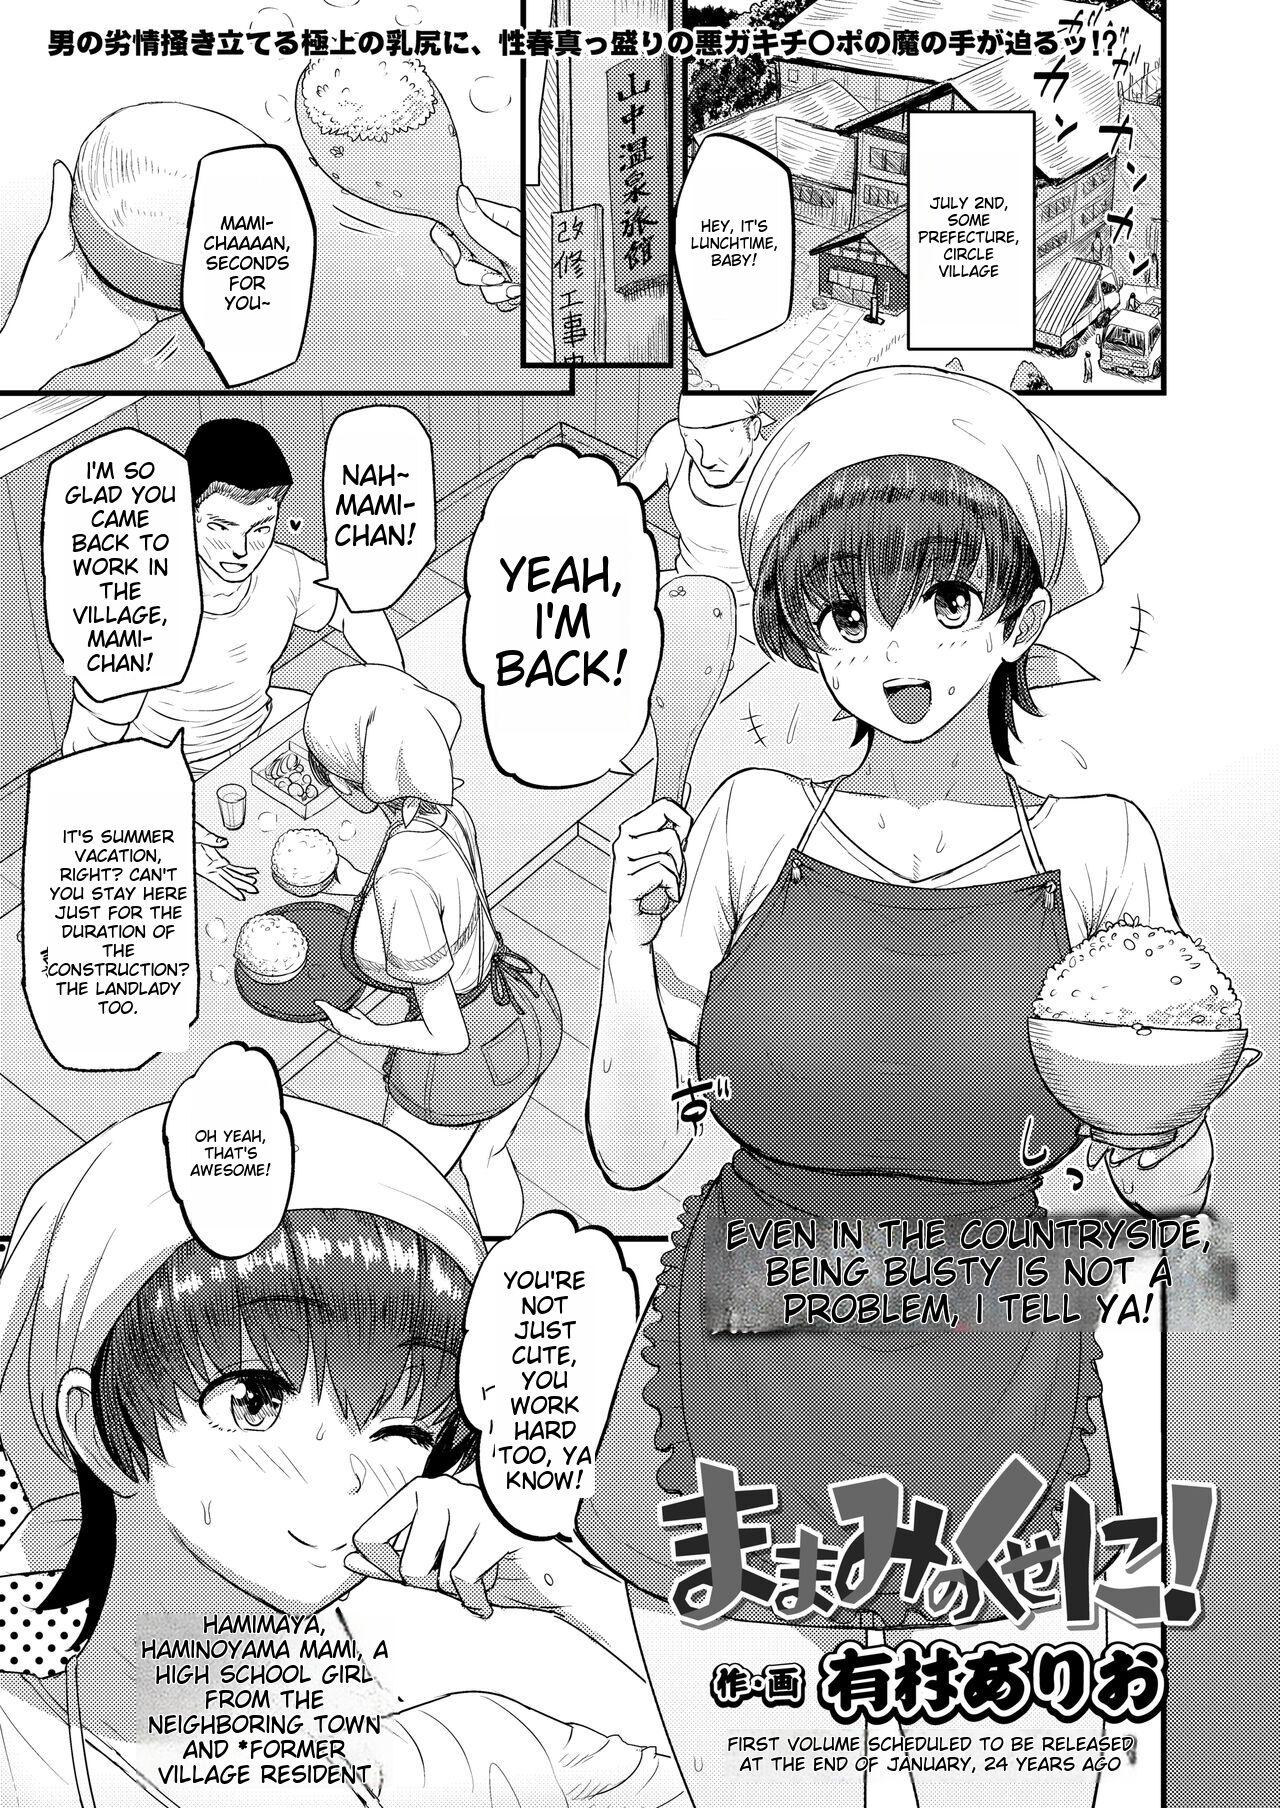 Family Mamami no Kuse ni! | Even In The Countryside, Being Busty Is Not A Problem, I Tell Ya! Yanks Featured - Page 1